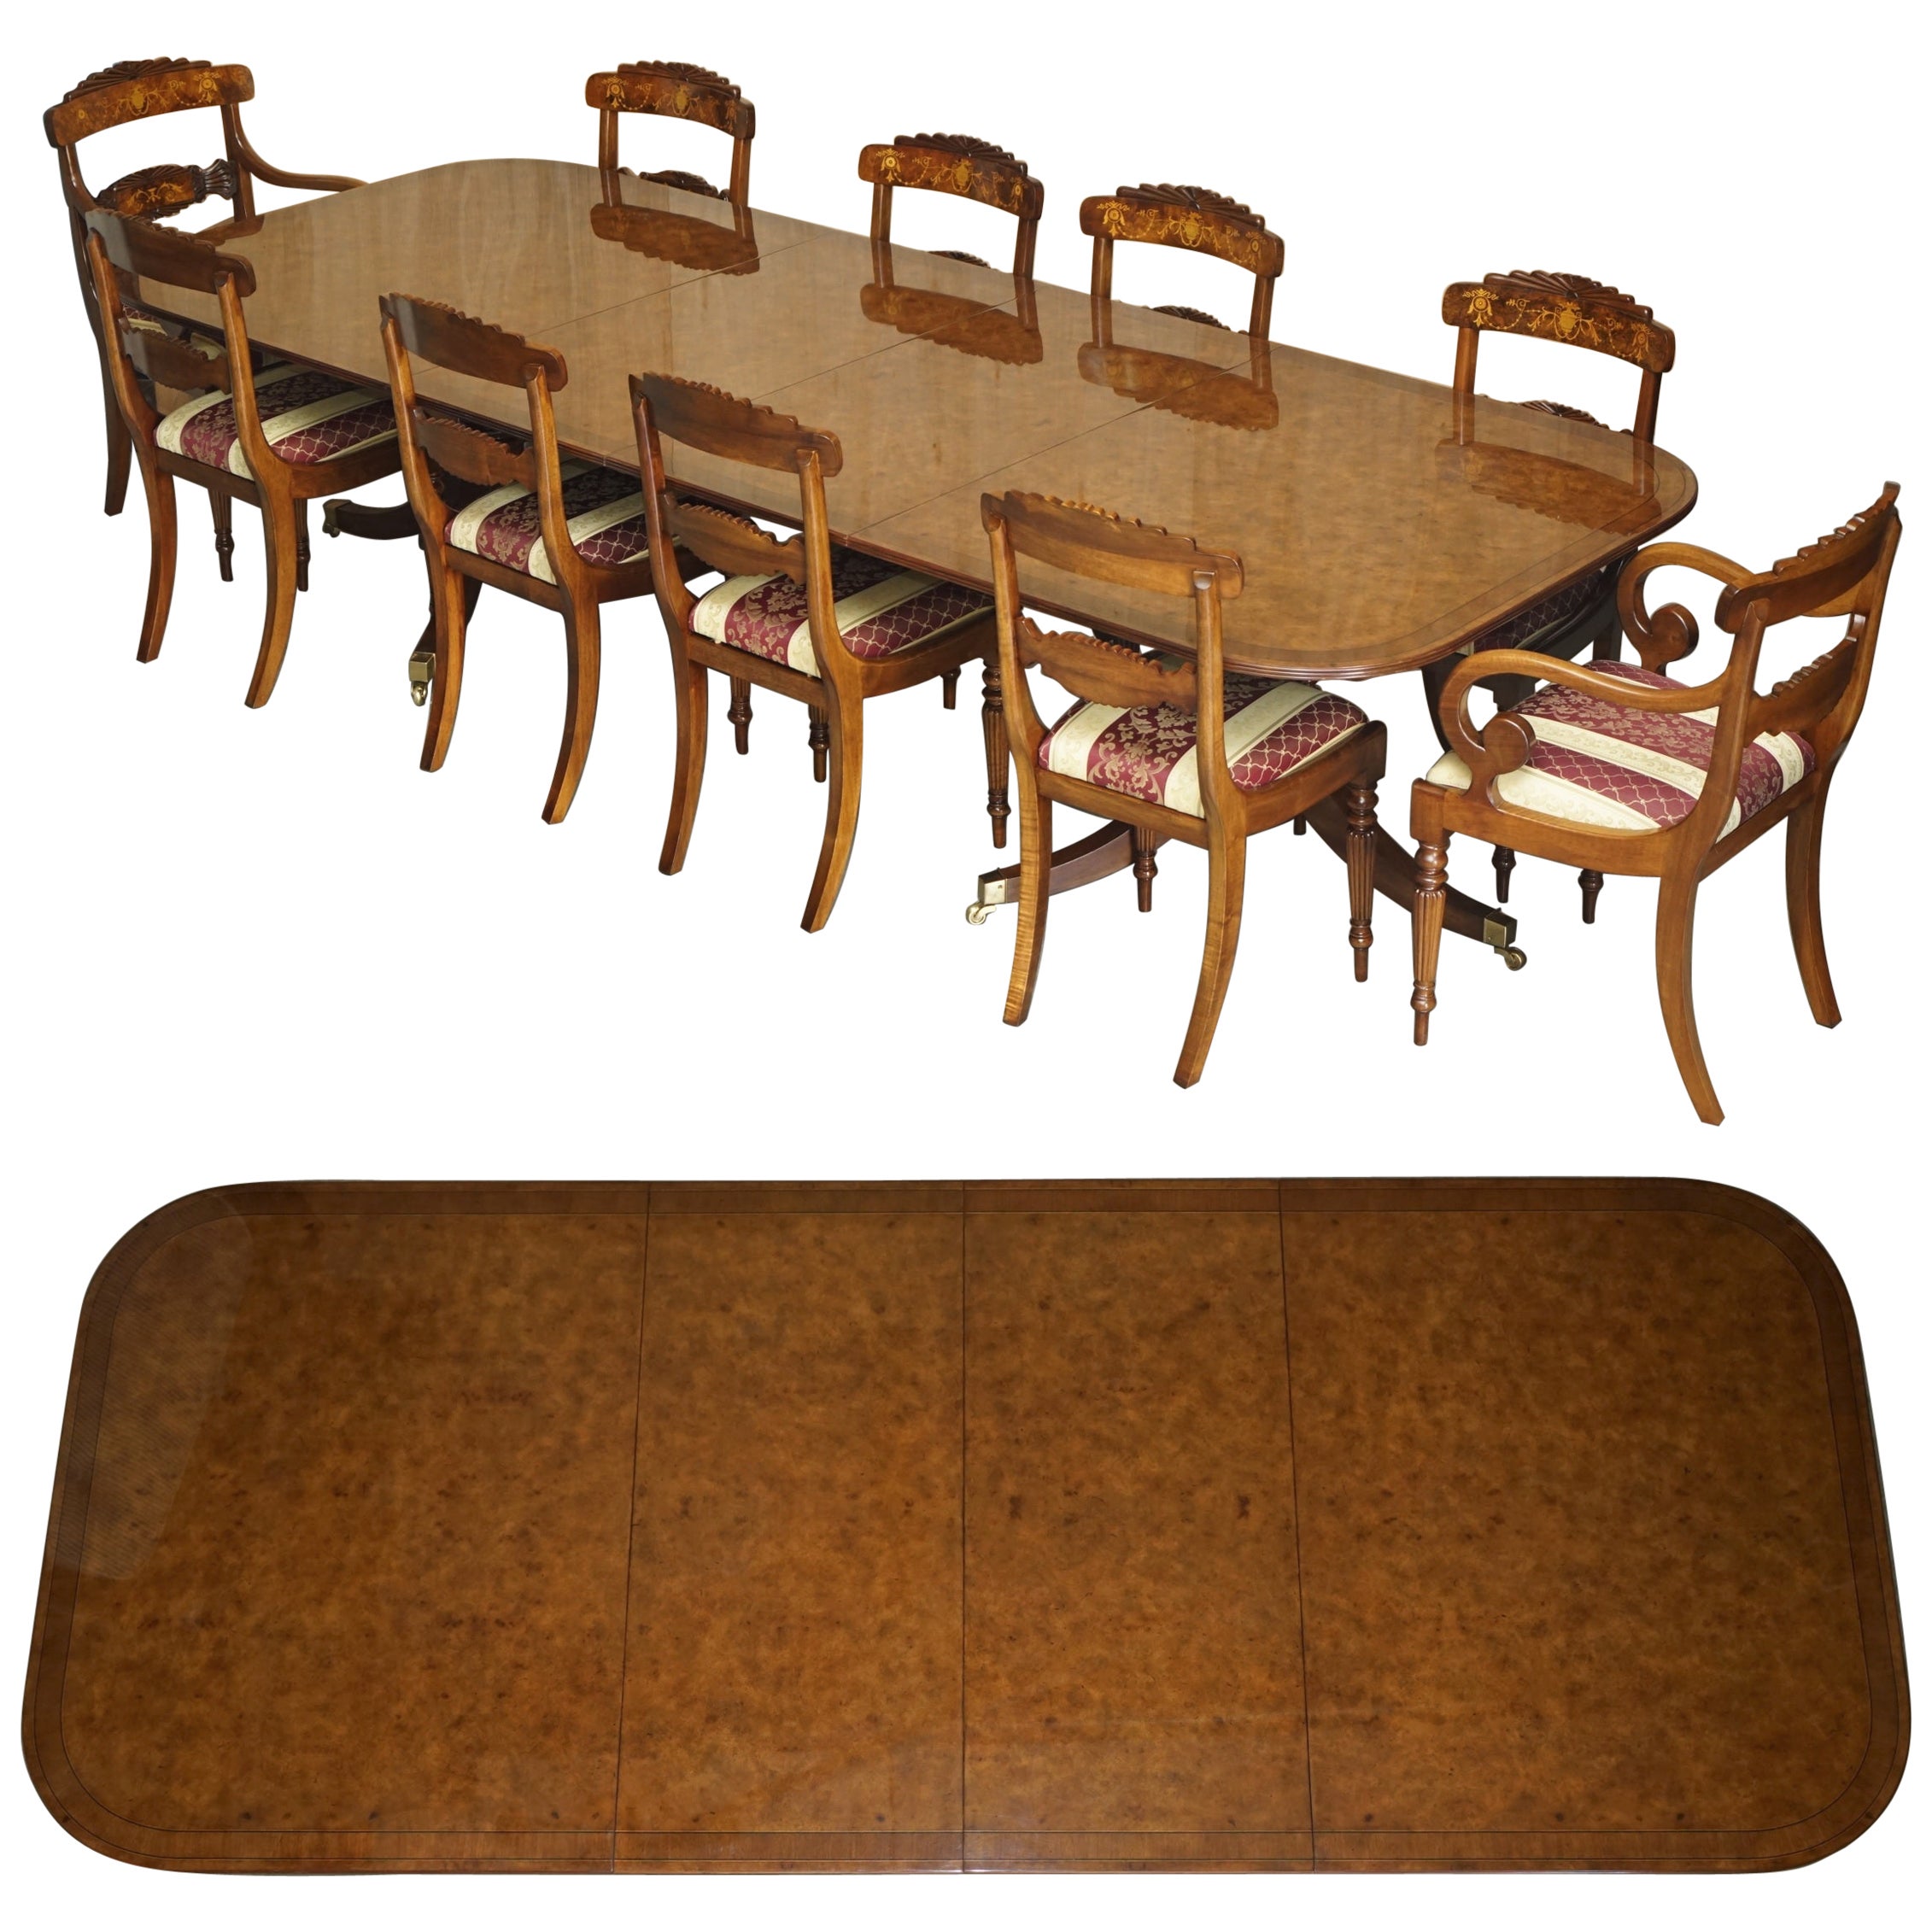 EXQUISITE TWO PEDESTAL BURR WALNUT EXTENDING DiNING TABLE & 10 CHAIRS SUITE For Sale